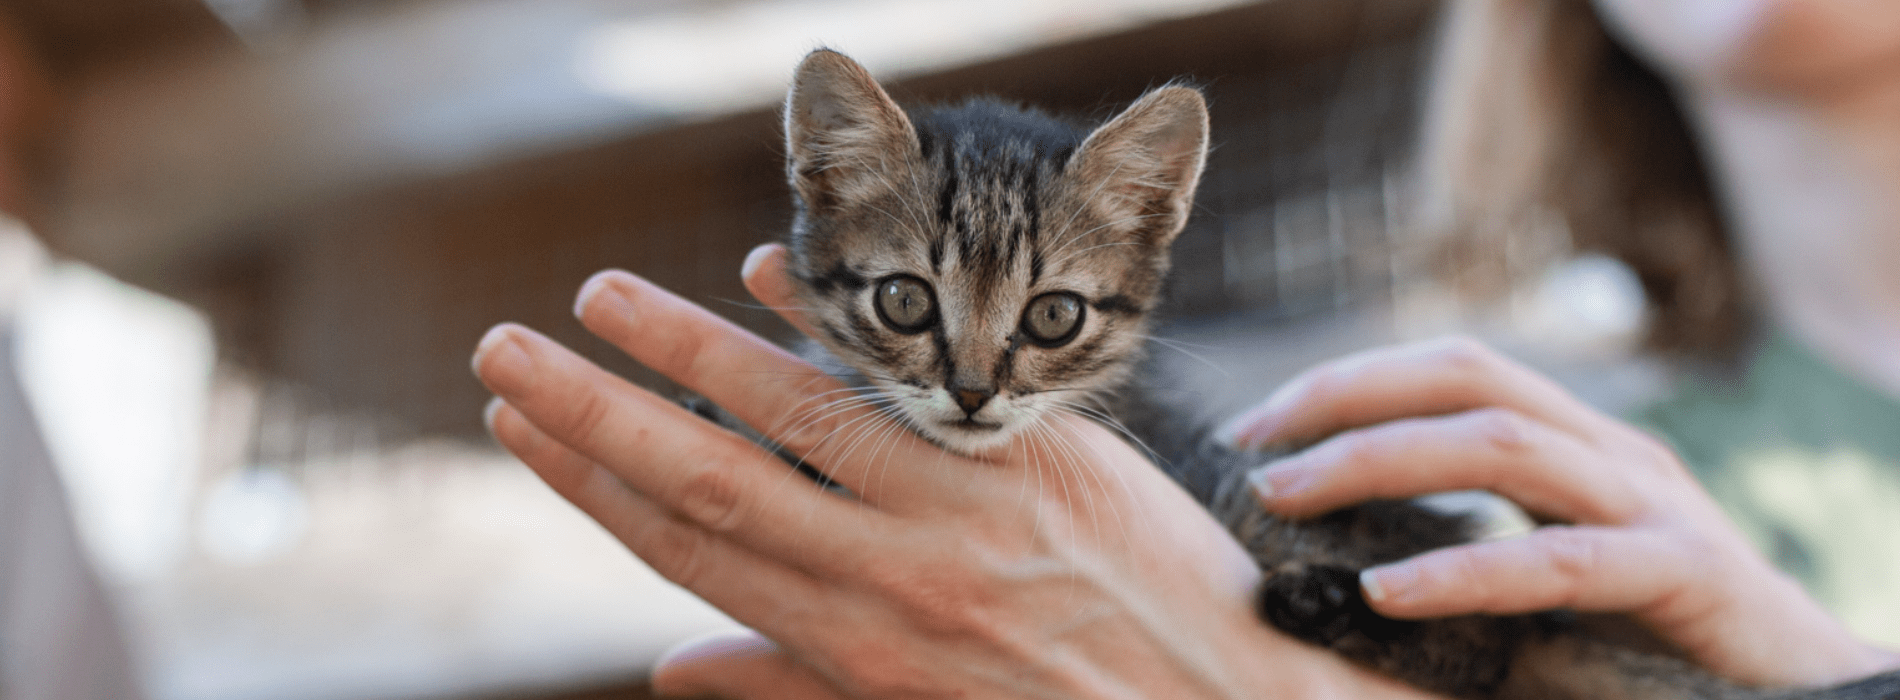 A kitten rests on an animal care worker's hand